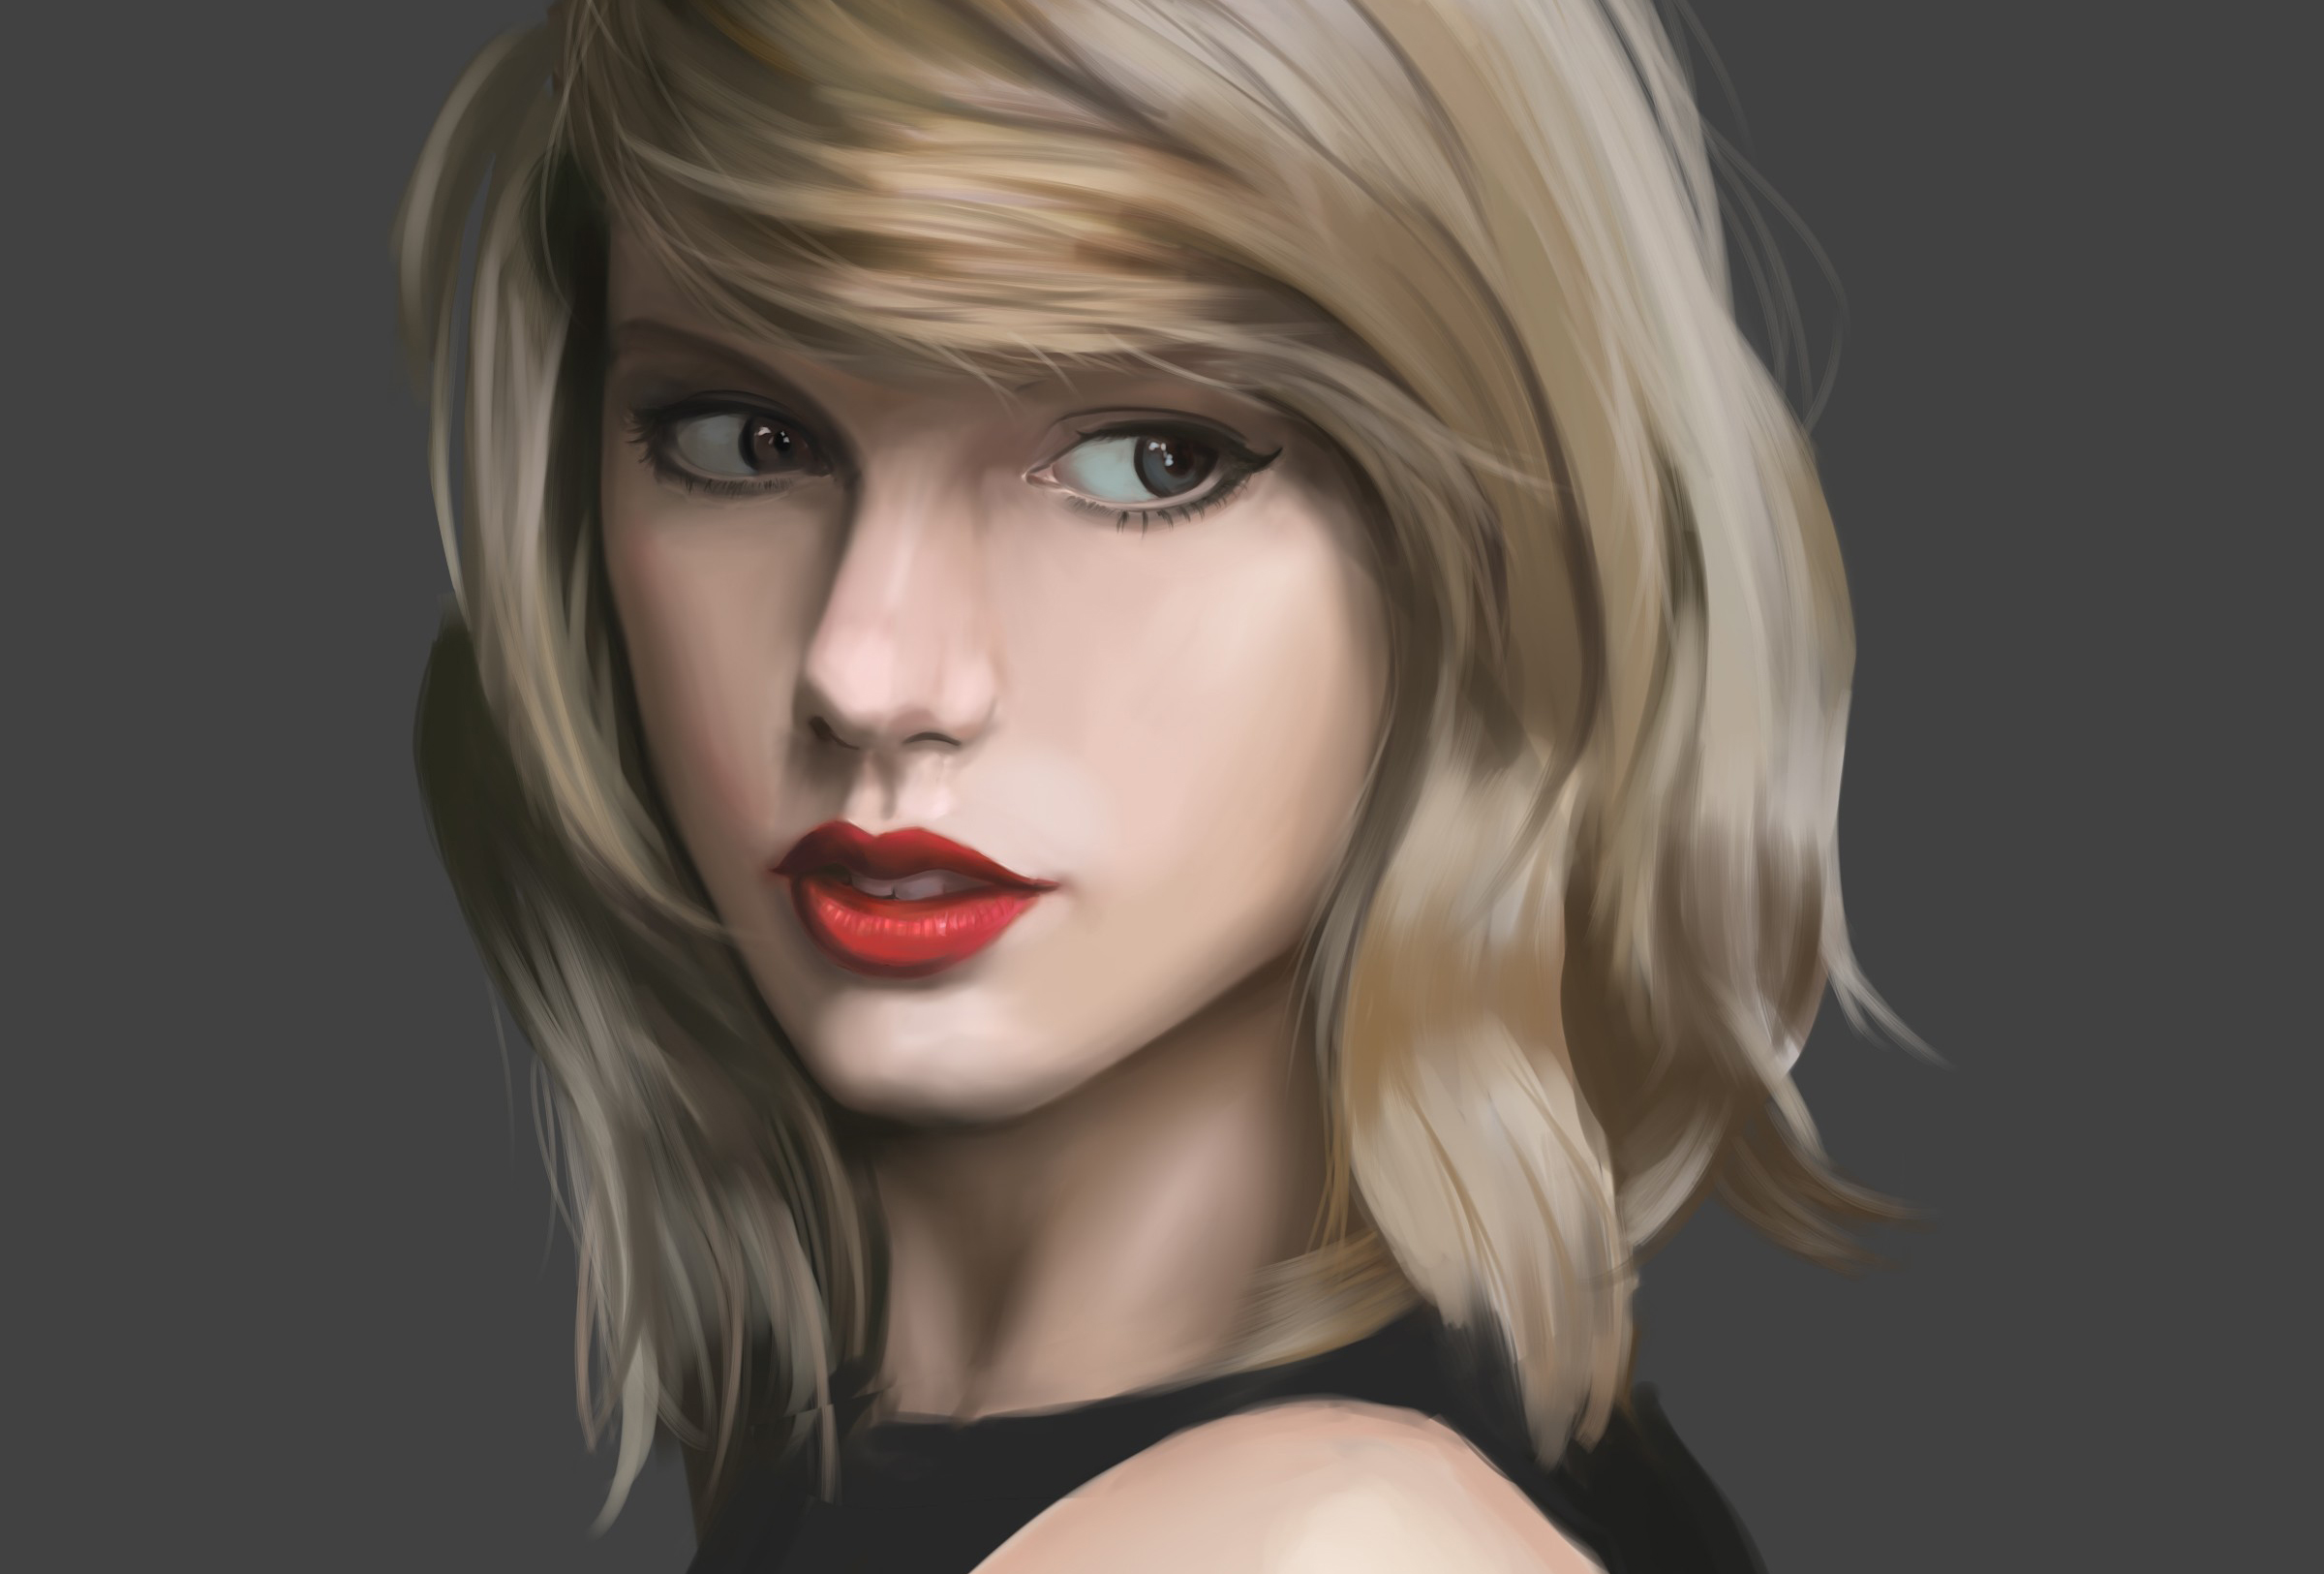 X taylor swift fan art laptop hd hd k wallpapers images backgrounds photos and pictures